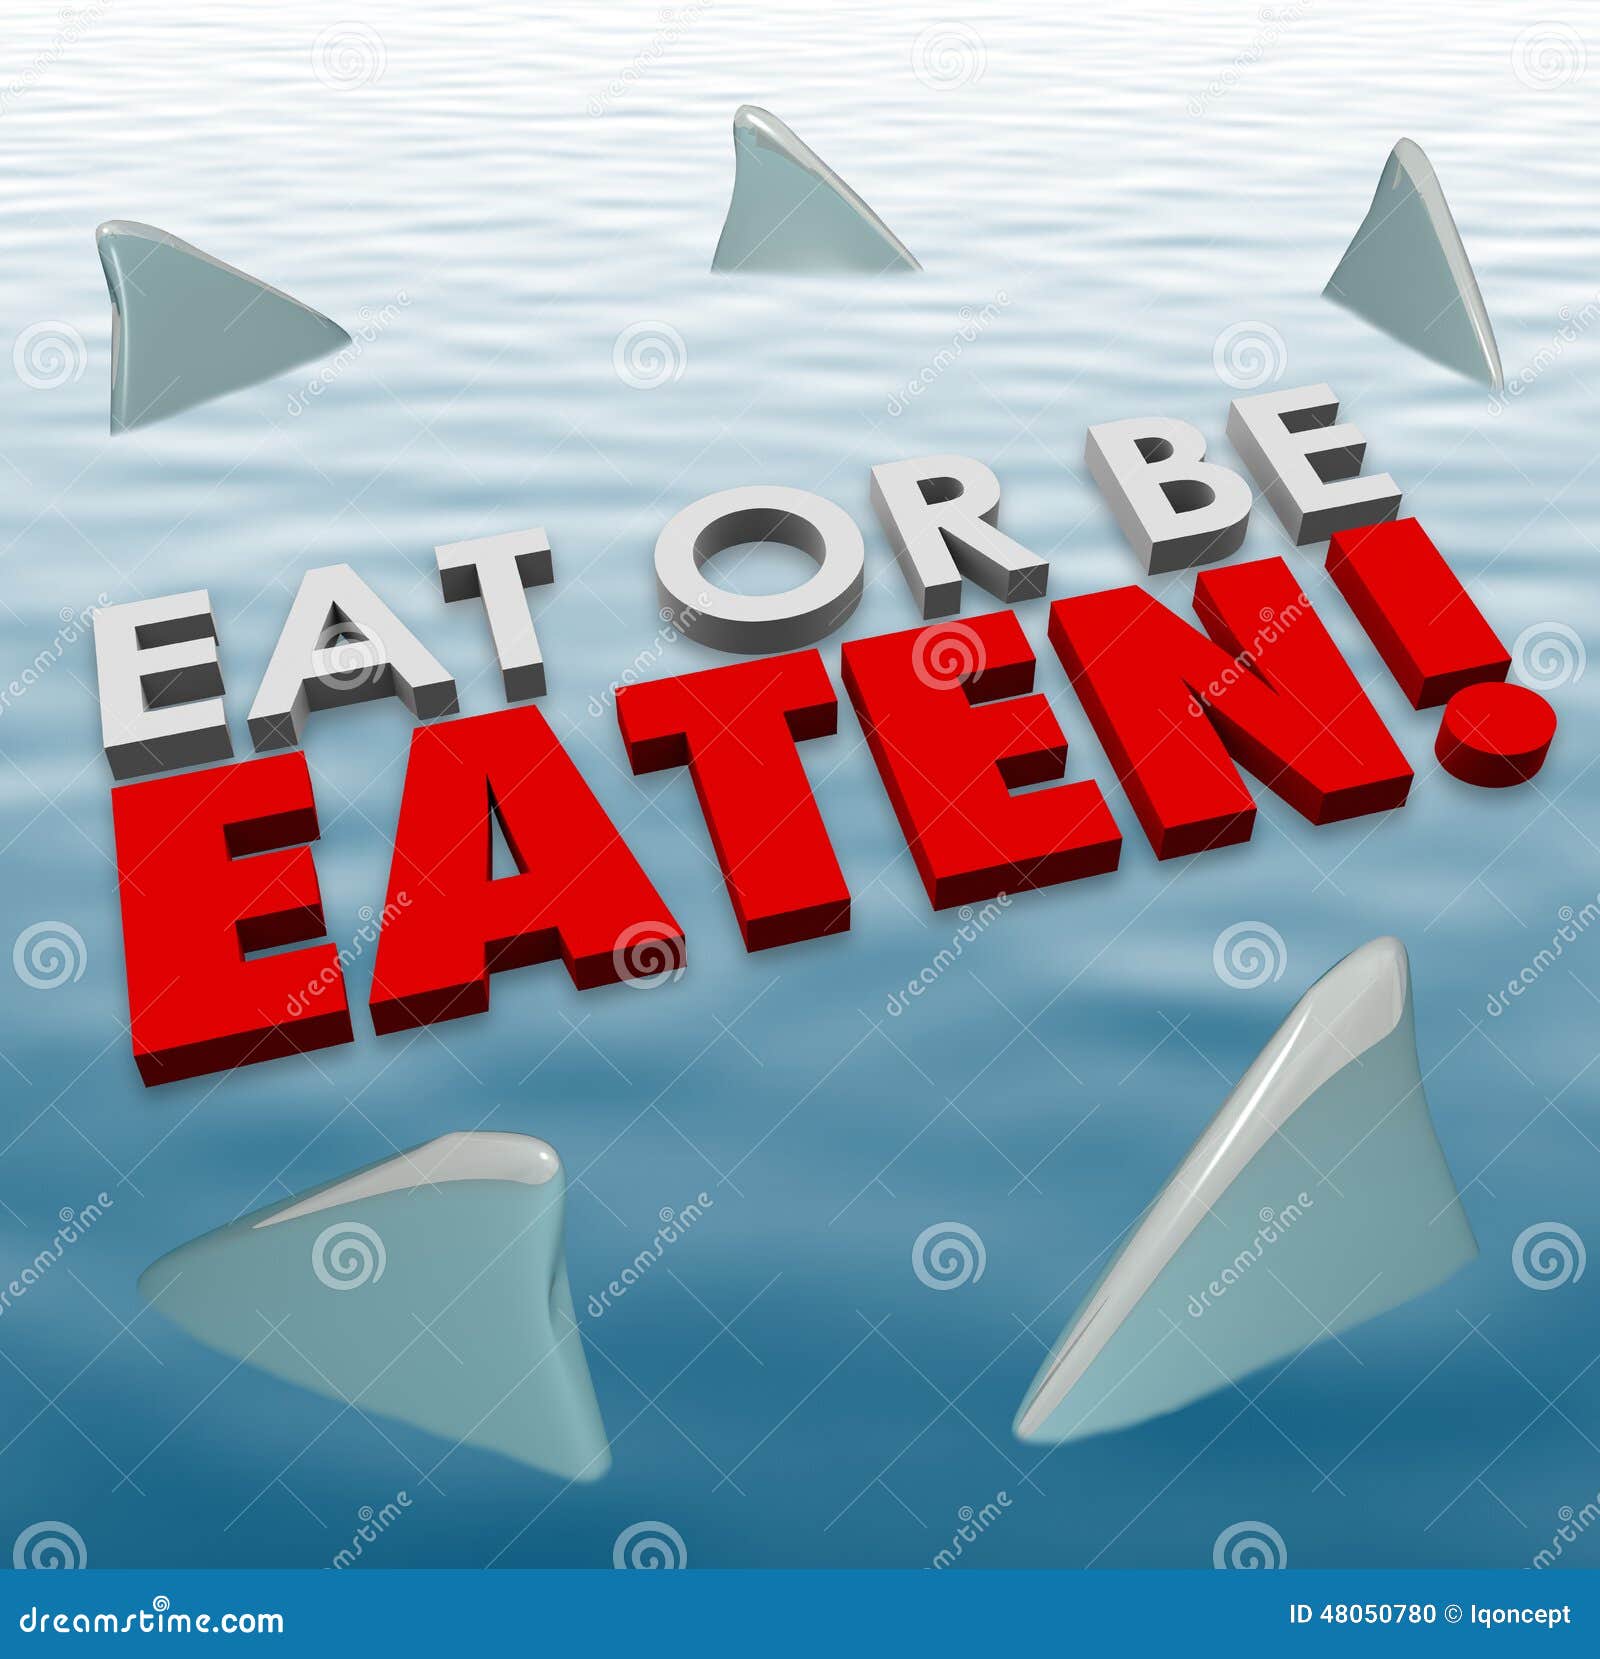 eat or be eaten sharks fins swimming fierce deadly competition